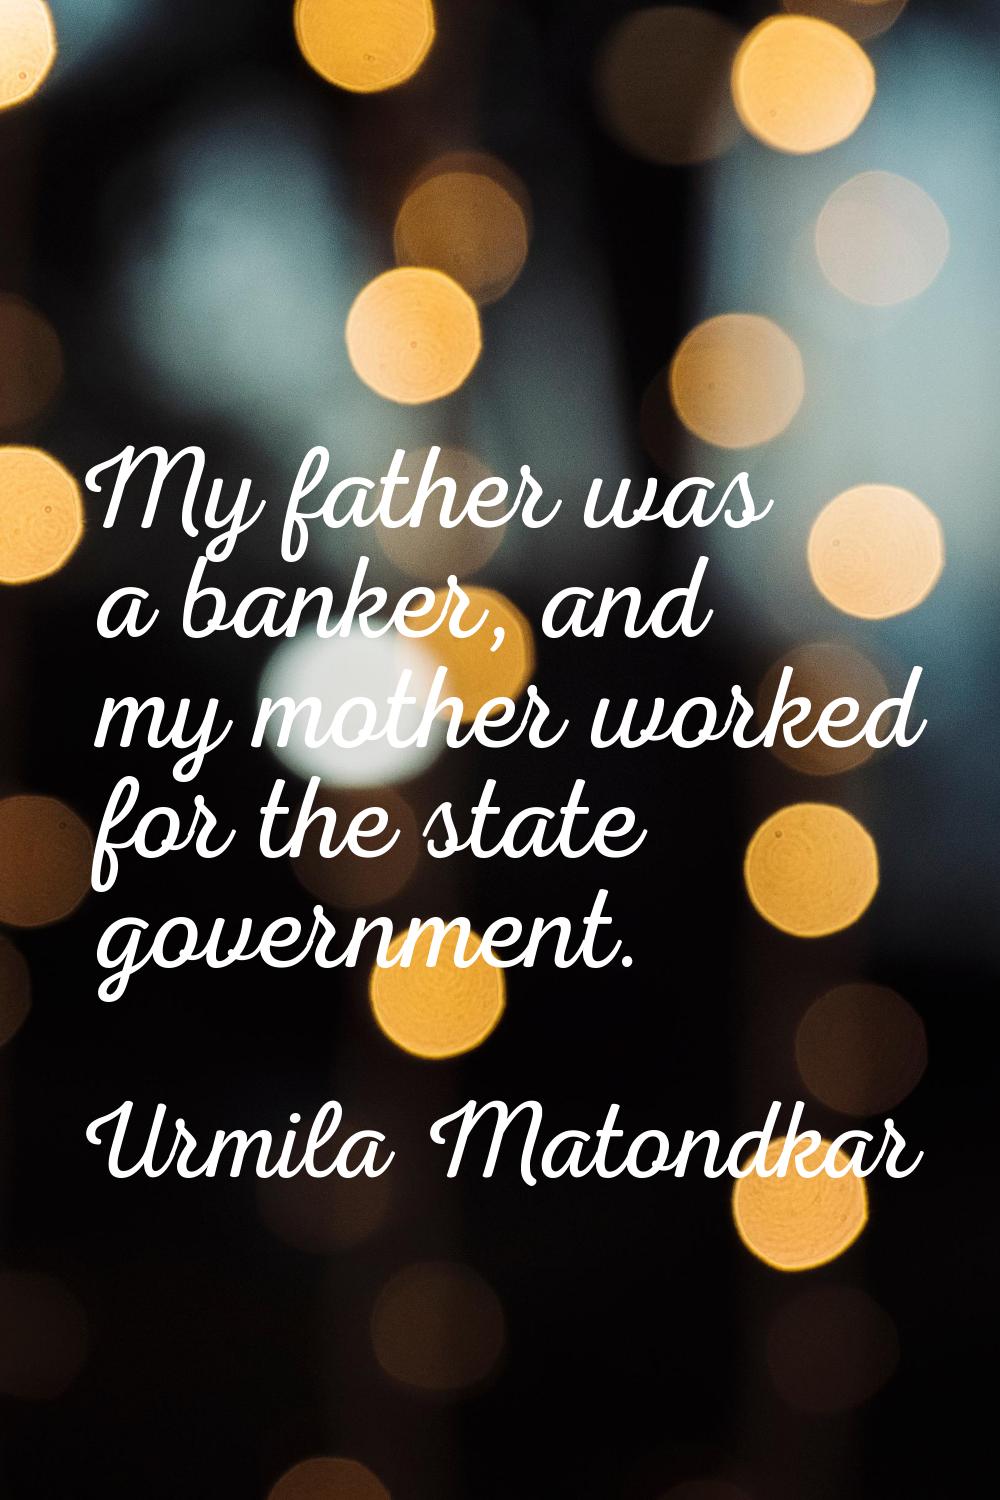 My father was a banker, and my mother worked for the state government.